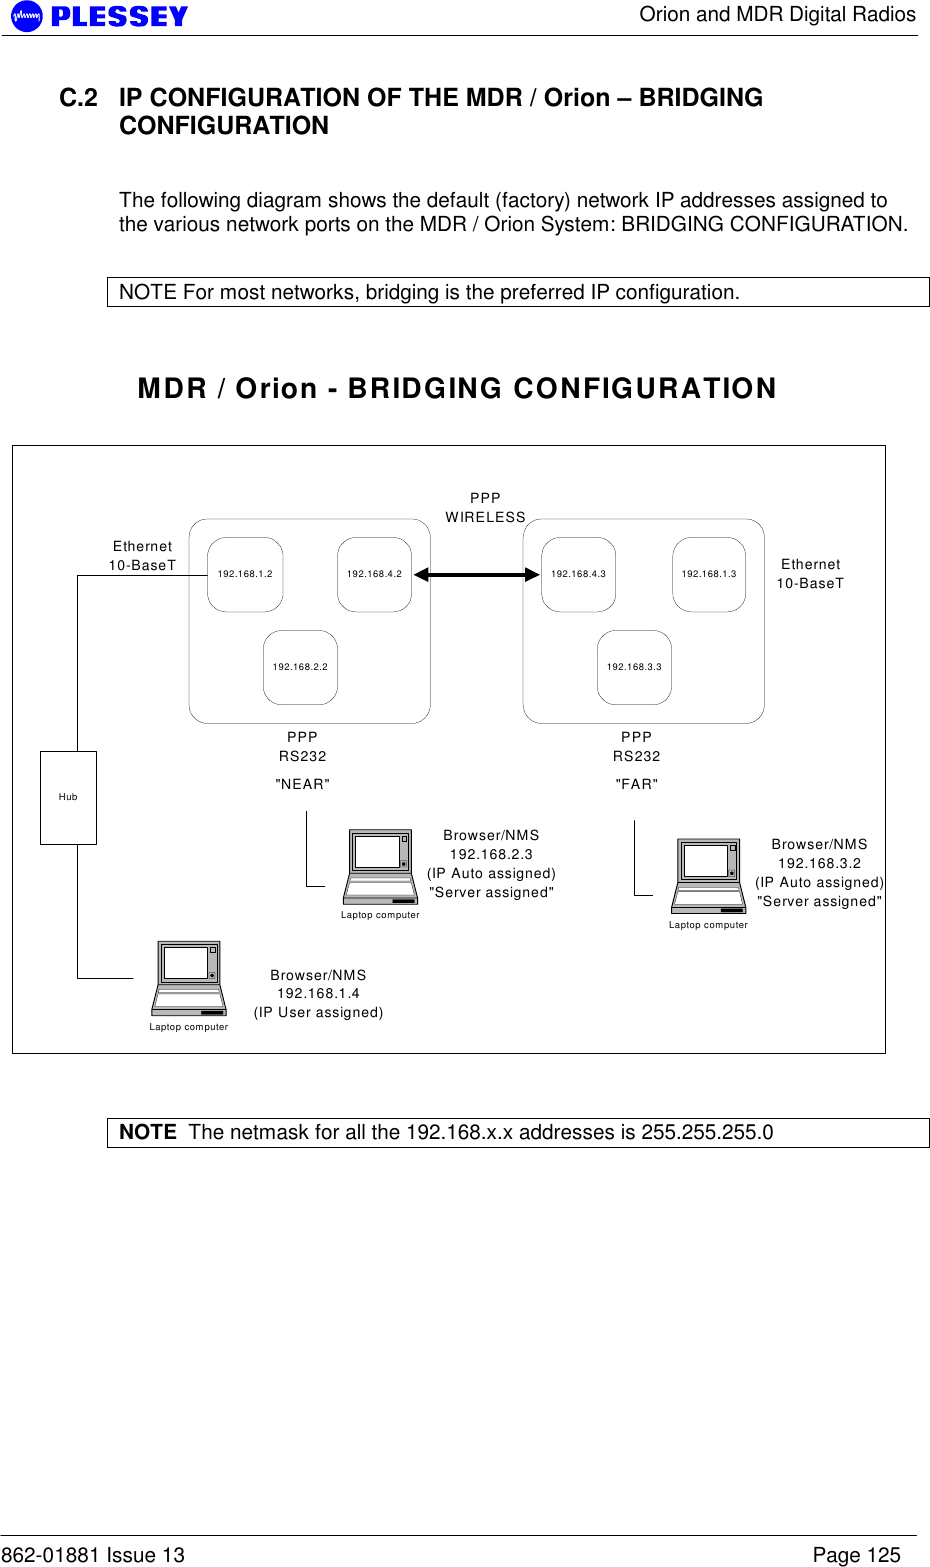      Orion and MDR Digital Radios  862-01881 Issue 13    Page 125 C.2  IP CONFIGURATION OF THE MDR / Orion – BRIDGING CONFIGURATION  The following diagram shows the default (factory) network IP addresses assigned to the various network ports on the MDR / Orion System: BRIDGING CONFIGURATION.    NOTE For most networks, bridging is the preferred IP configuration.  192.168.1.2 192.168.4.2192.168.2.2192.168.4.3 192.168.1.3192.168.3.3Ethernet10-BaseTPPPRS232PPPWIRELESSPPPRS232Ethernet10-BaseT&quot;NEAR&quot; &quot;FAR&quot;Laptop computerBrowser/NMS192.168.1.4(IP User assigned)HubMDR / Orion - BRIDGING CONFIGURATIONLaptop computerBrowser/NMS192.168.3.2(IP Auto assigned)&quot;Server assigned&quot;Laptop computerBrowser/NMS192.168.2.3(IP Auto assigned)&quot;Server assigned&quot;  NOTE  The netmask for all the 192.168.x.x addresses is 255.255.255.0  